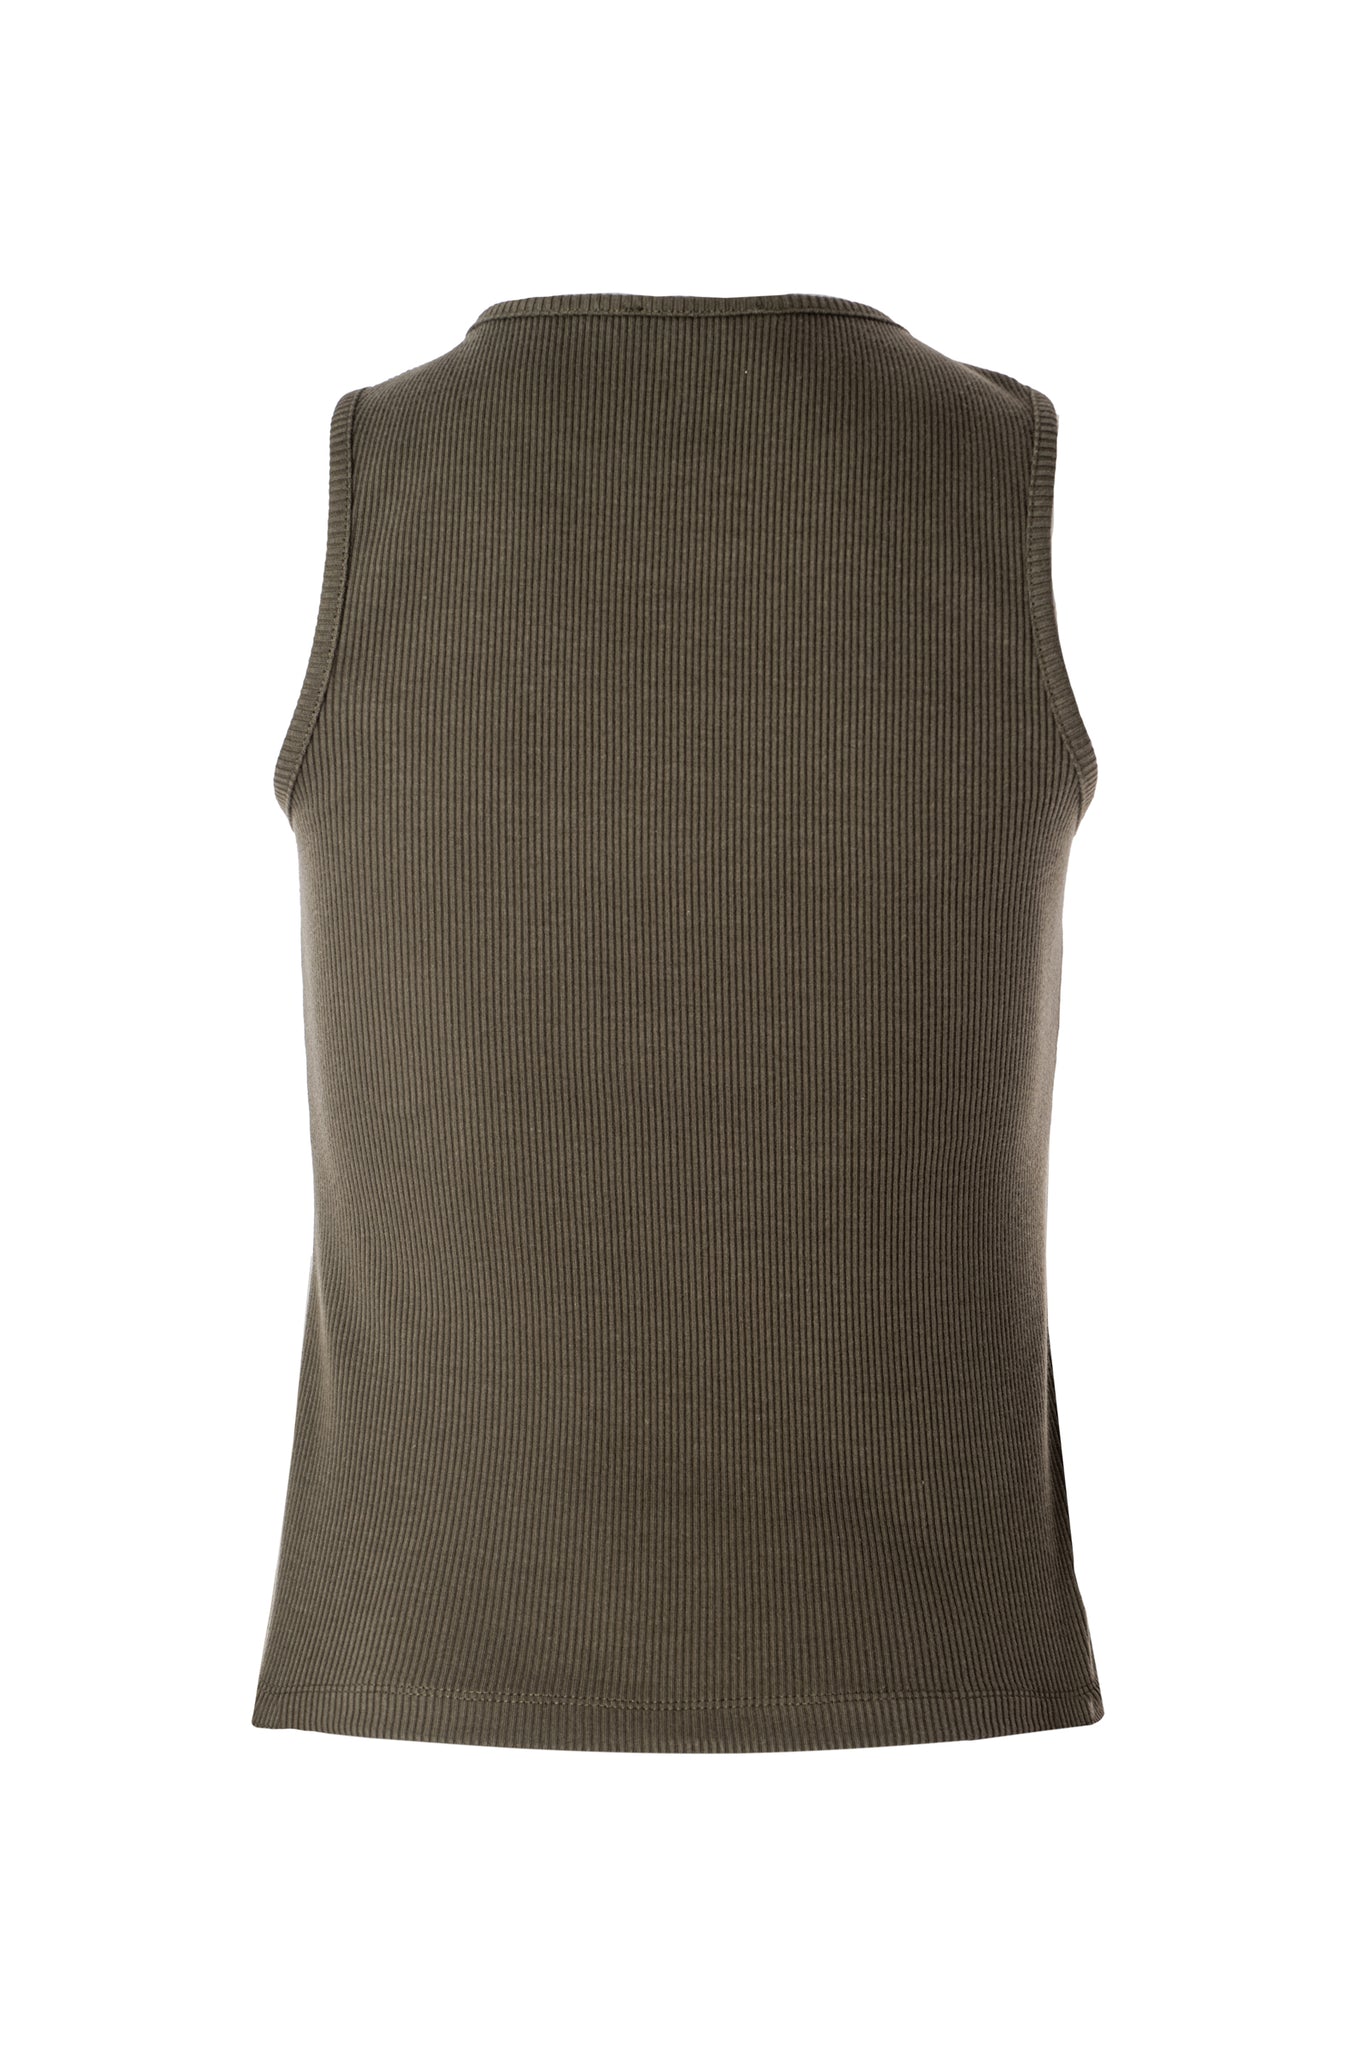 RIBBED tank TOP in olive green